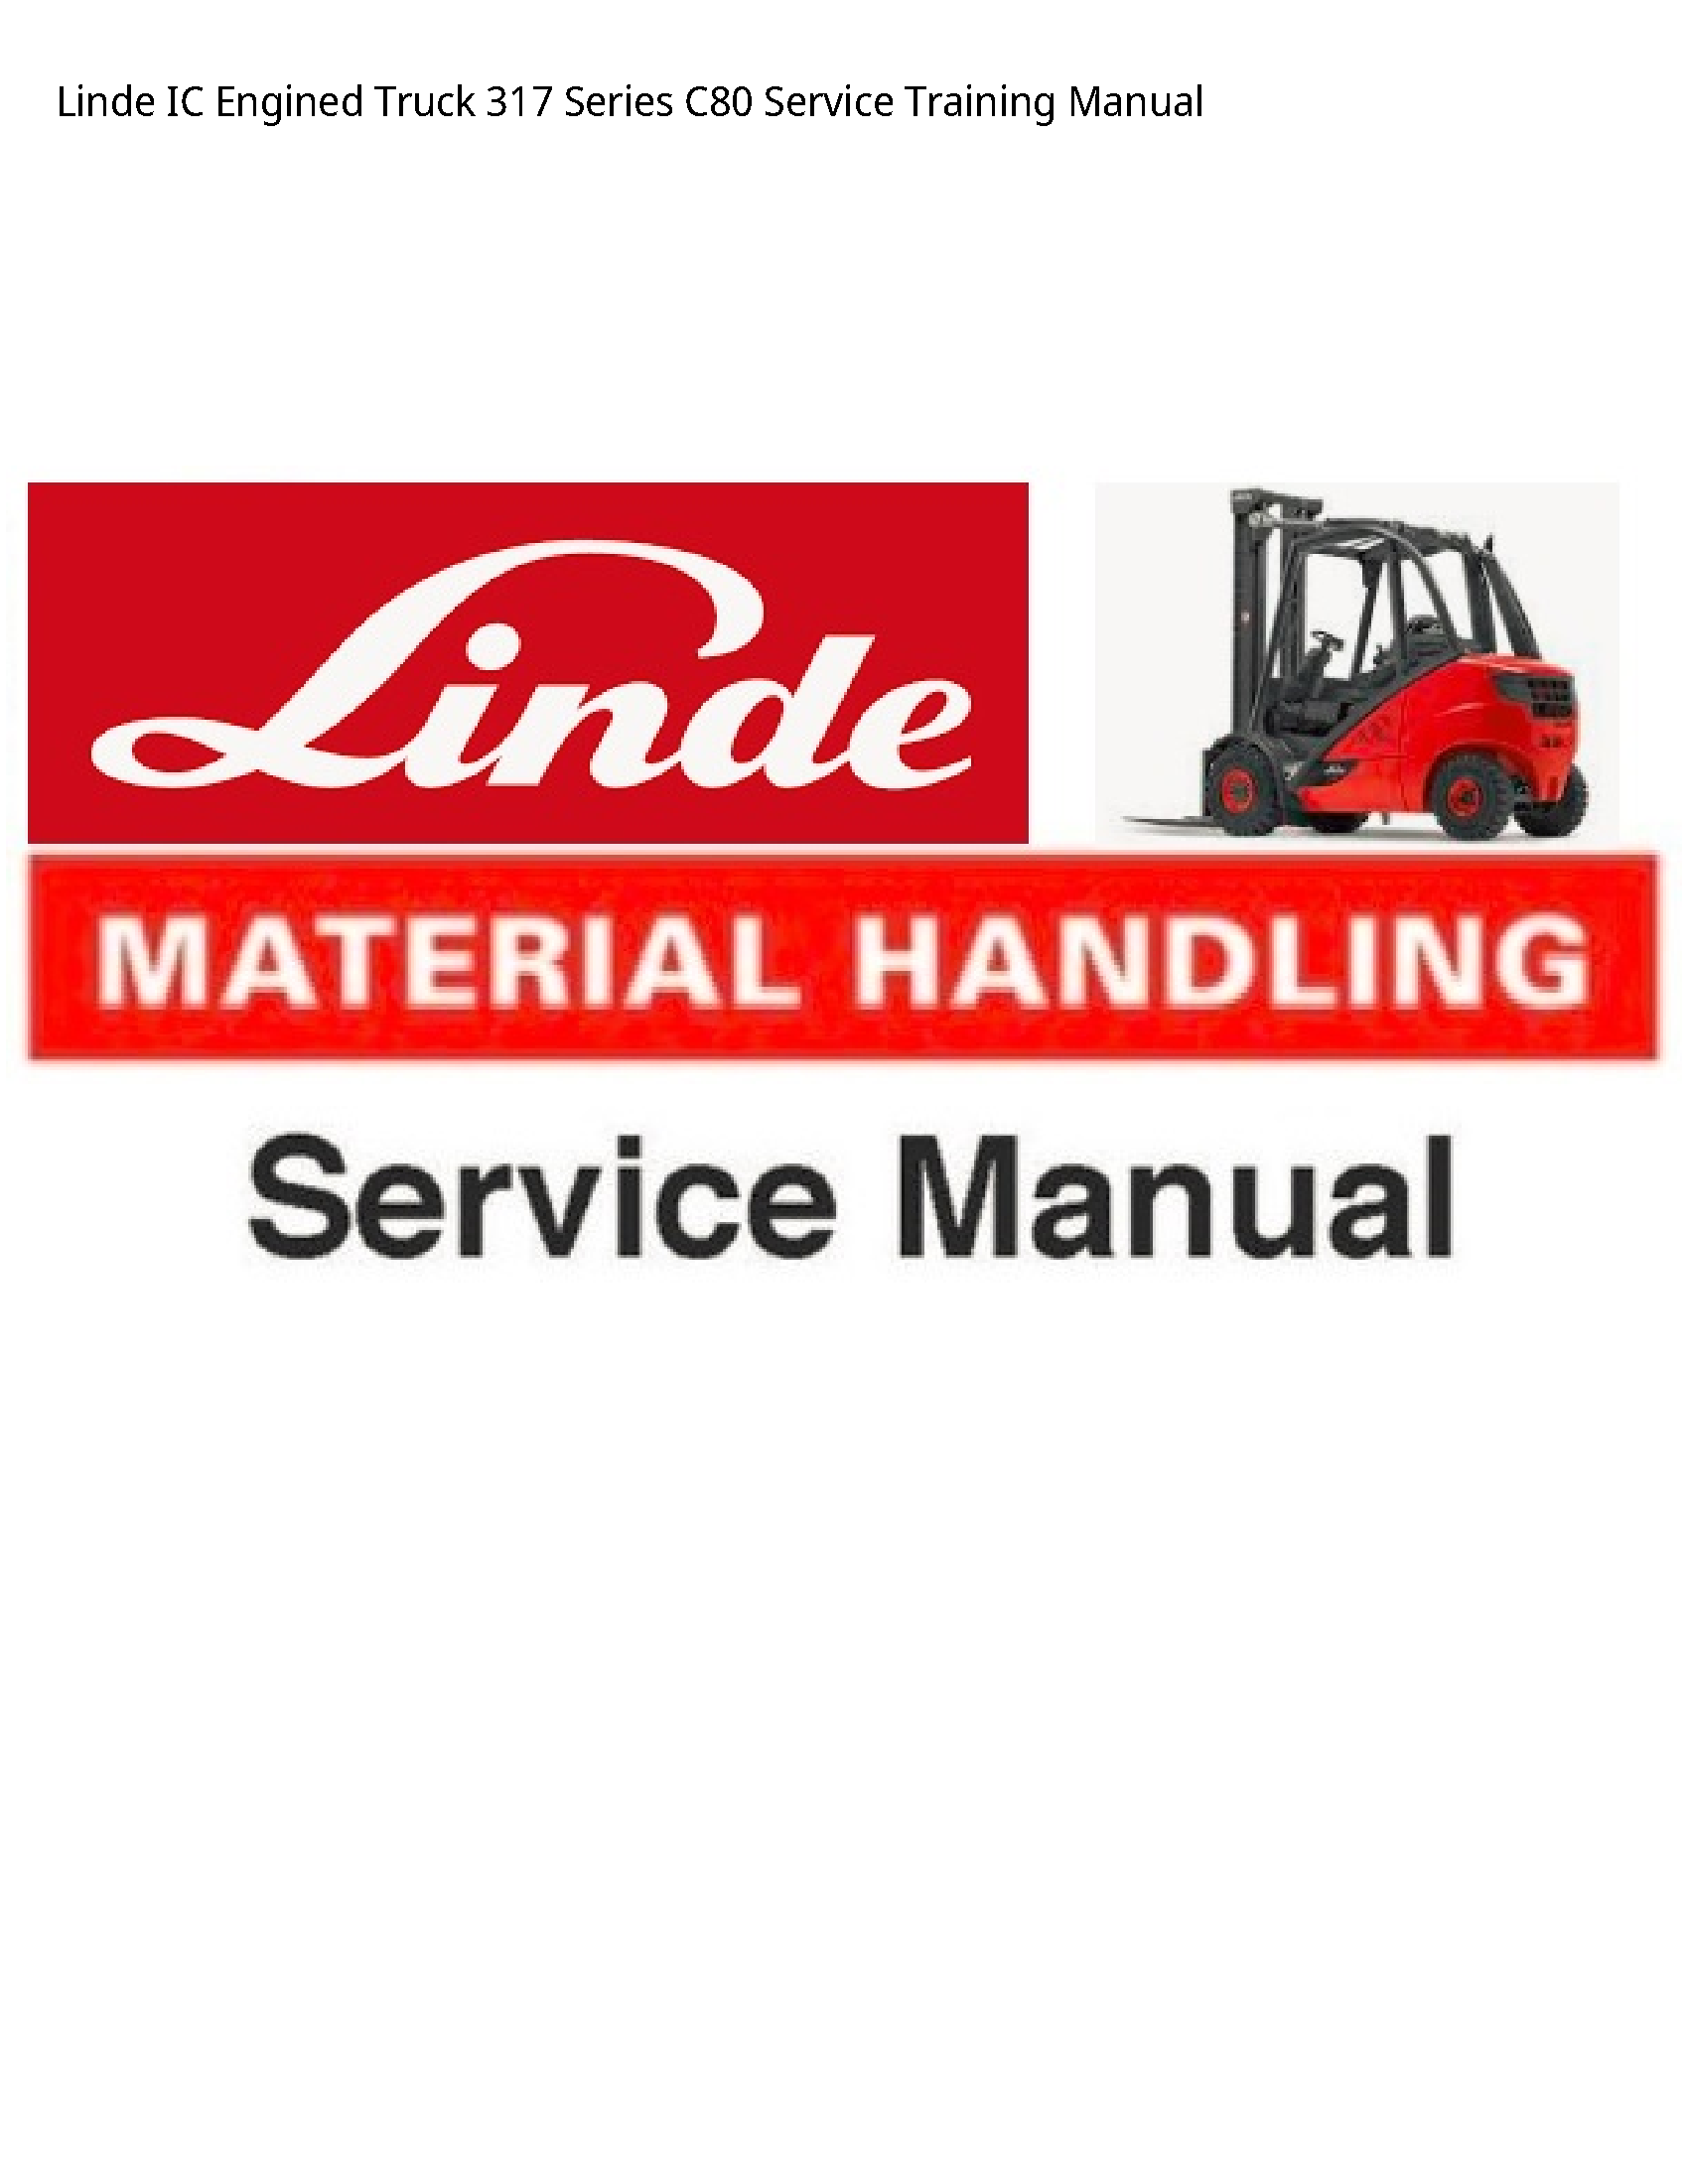 Linde 317 IC Engined Truck Series Service Training manual